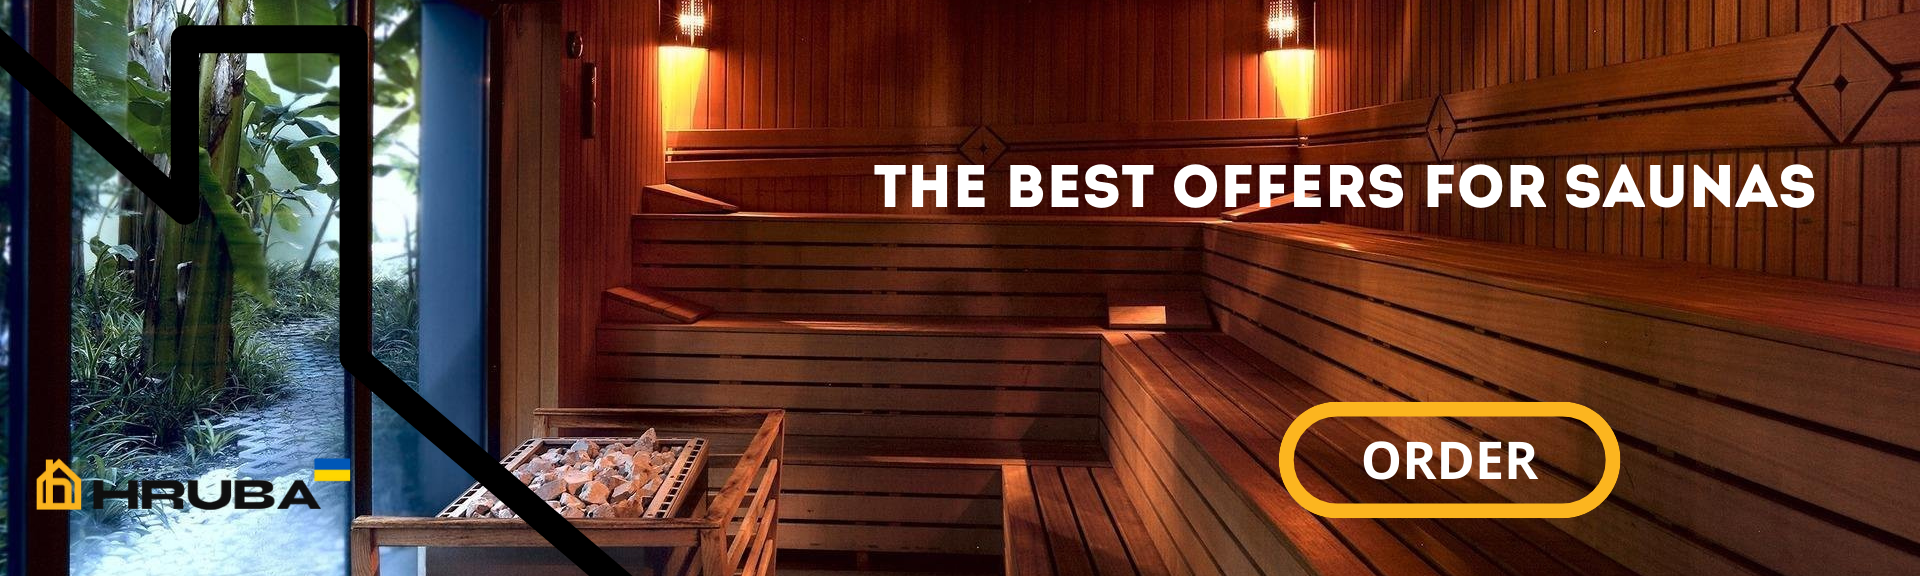 Buy the best offers on baths and saunas in Kyiv at a good price (073) 35 35 487 | HRUBA